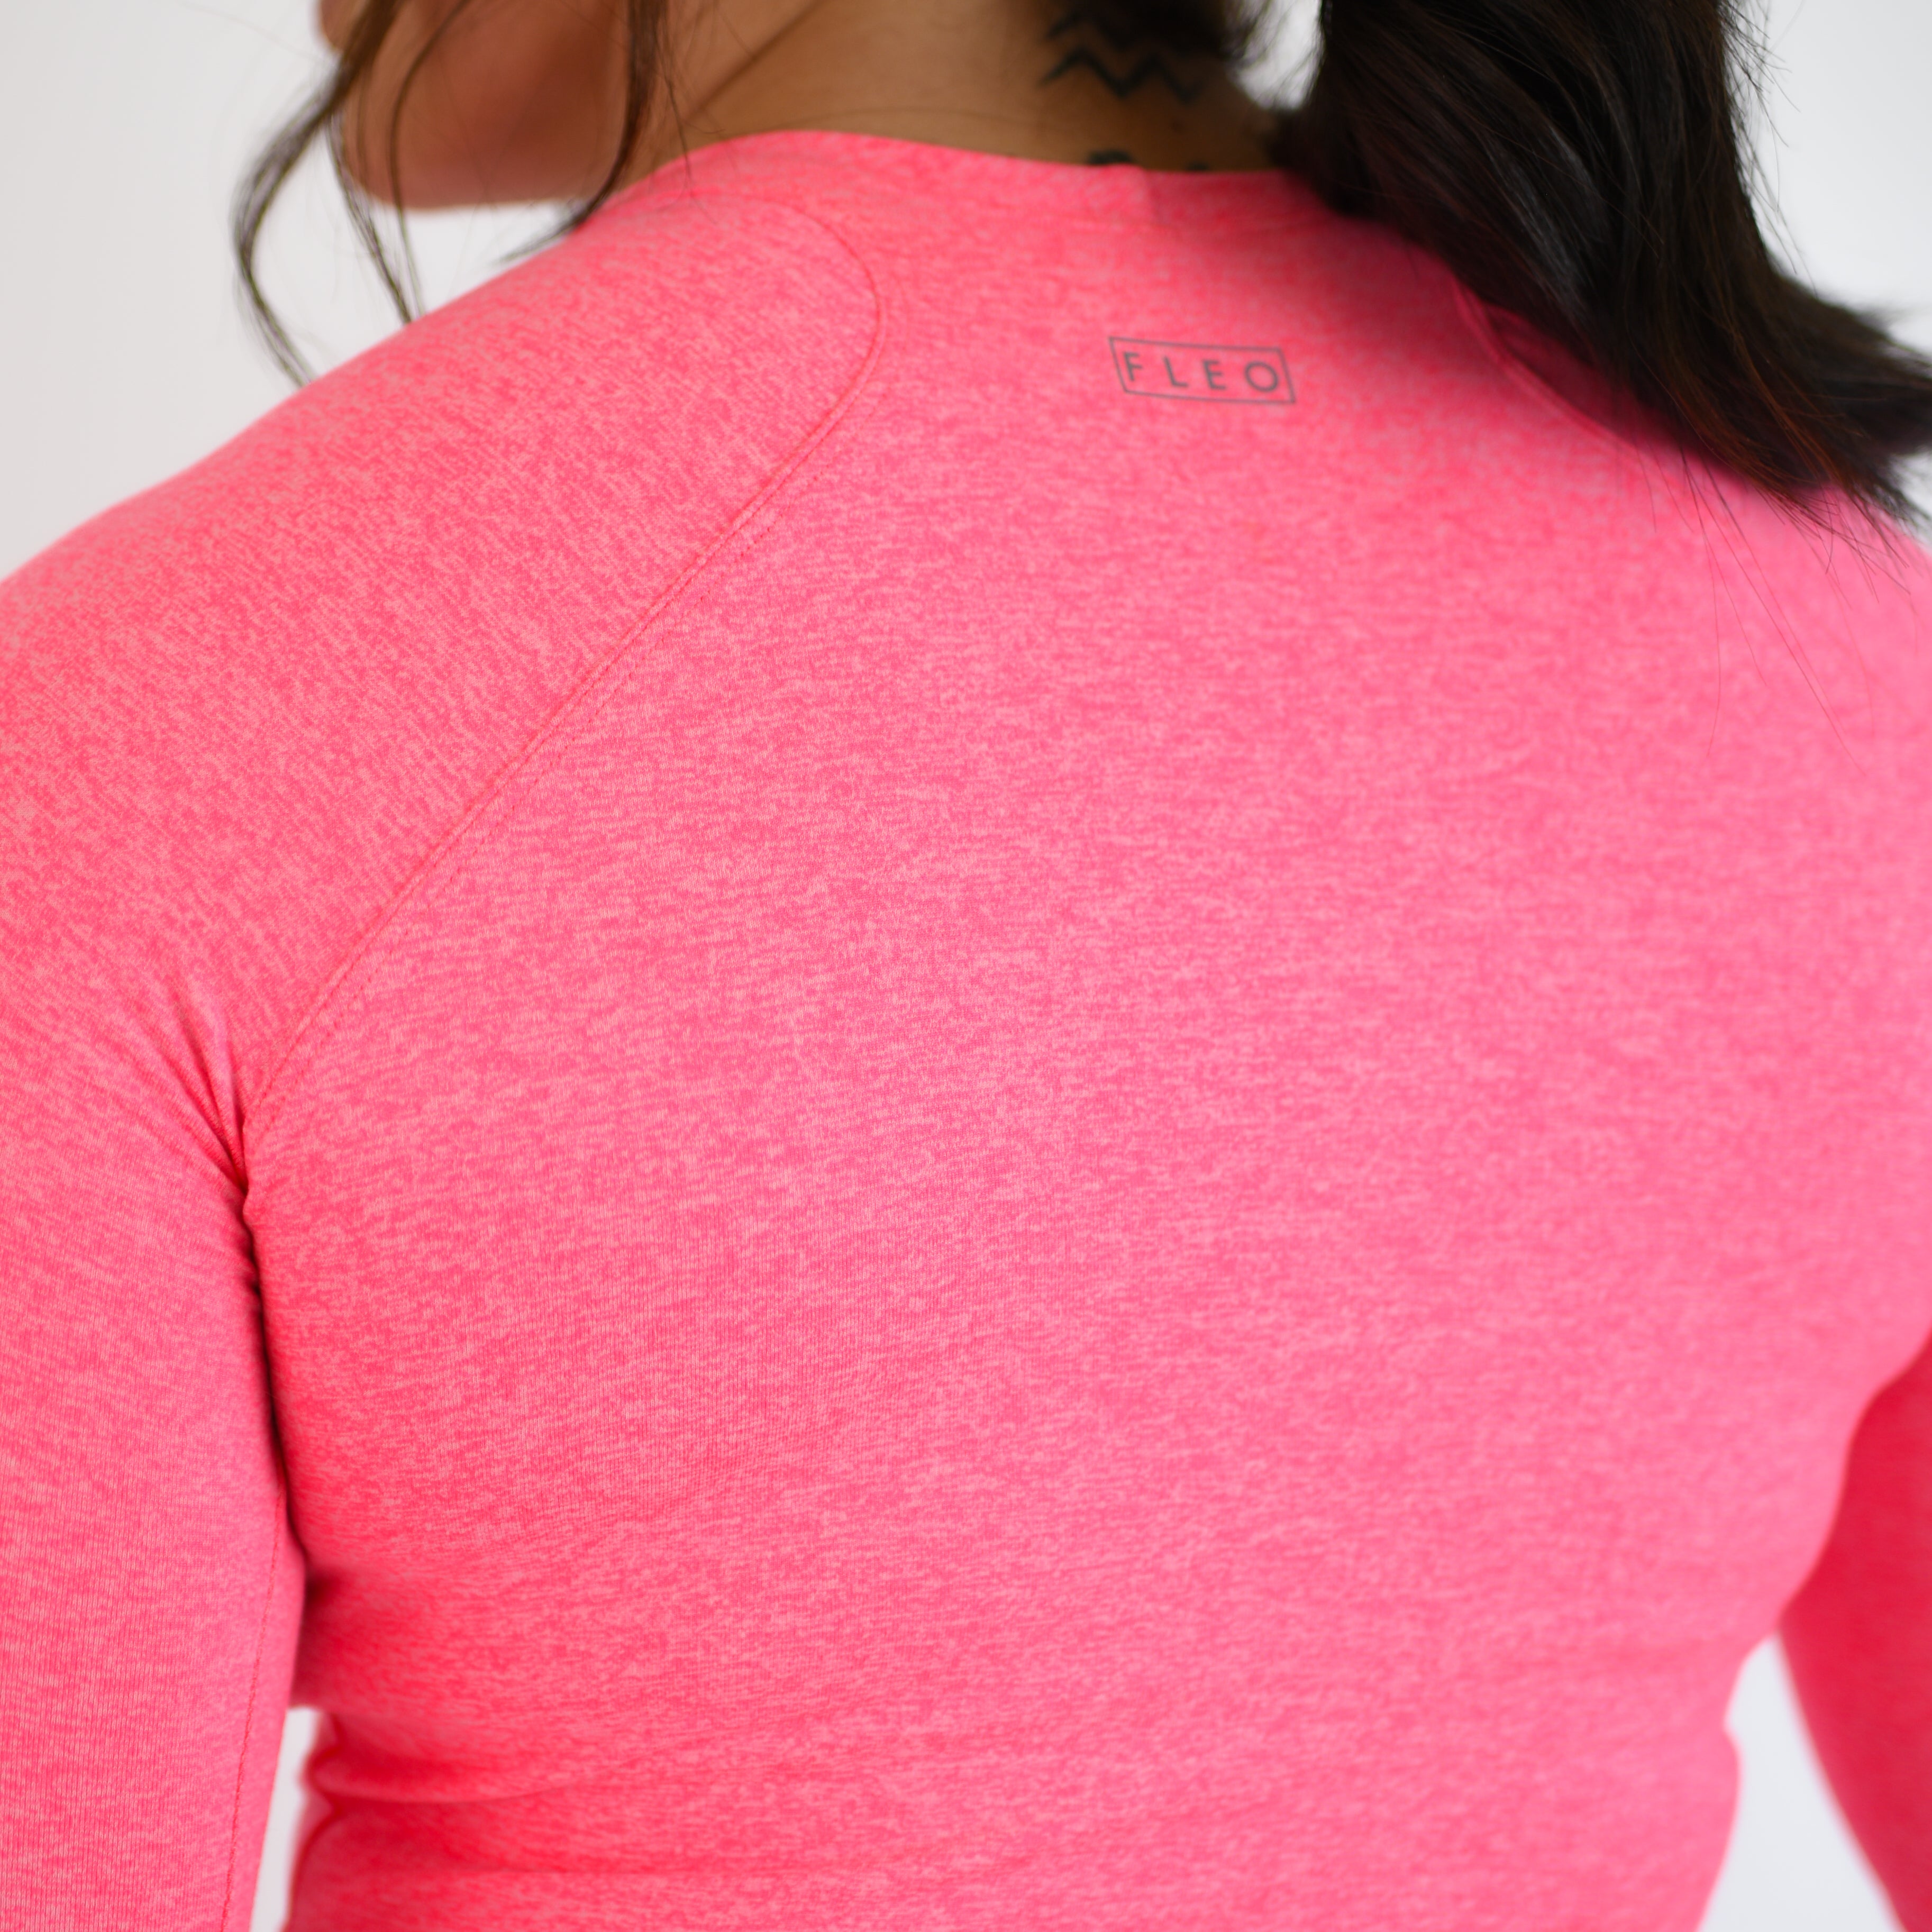 Electric Pink Women's Long Sleeve Shirt - Cropped - Foundation